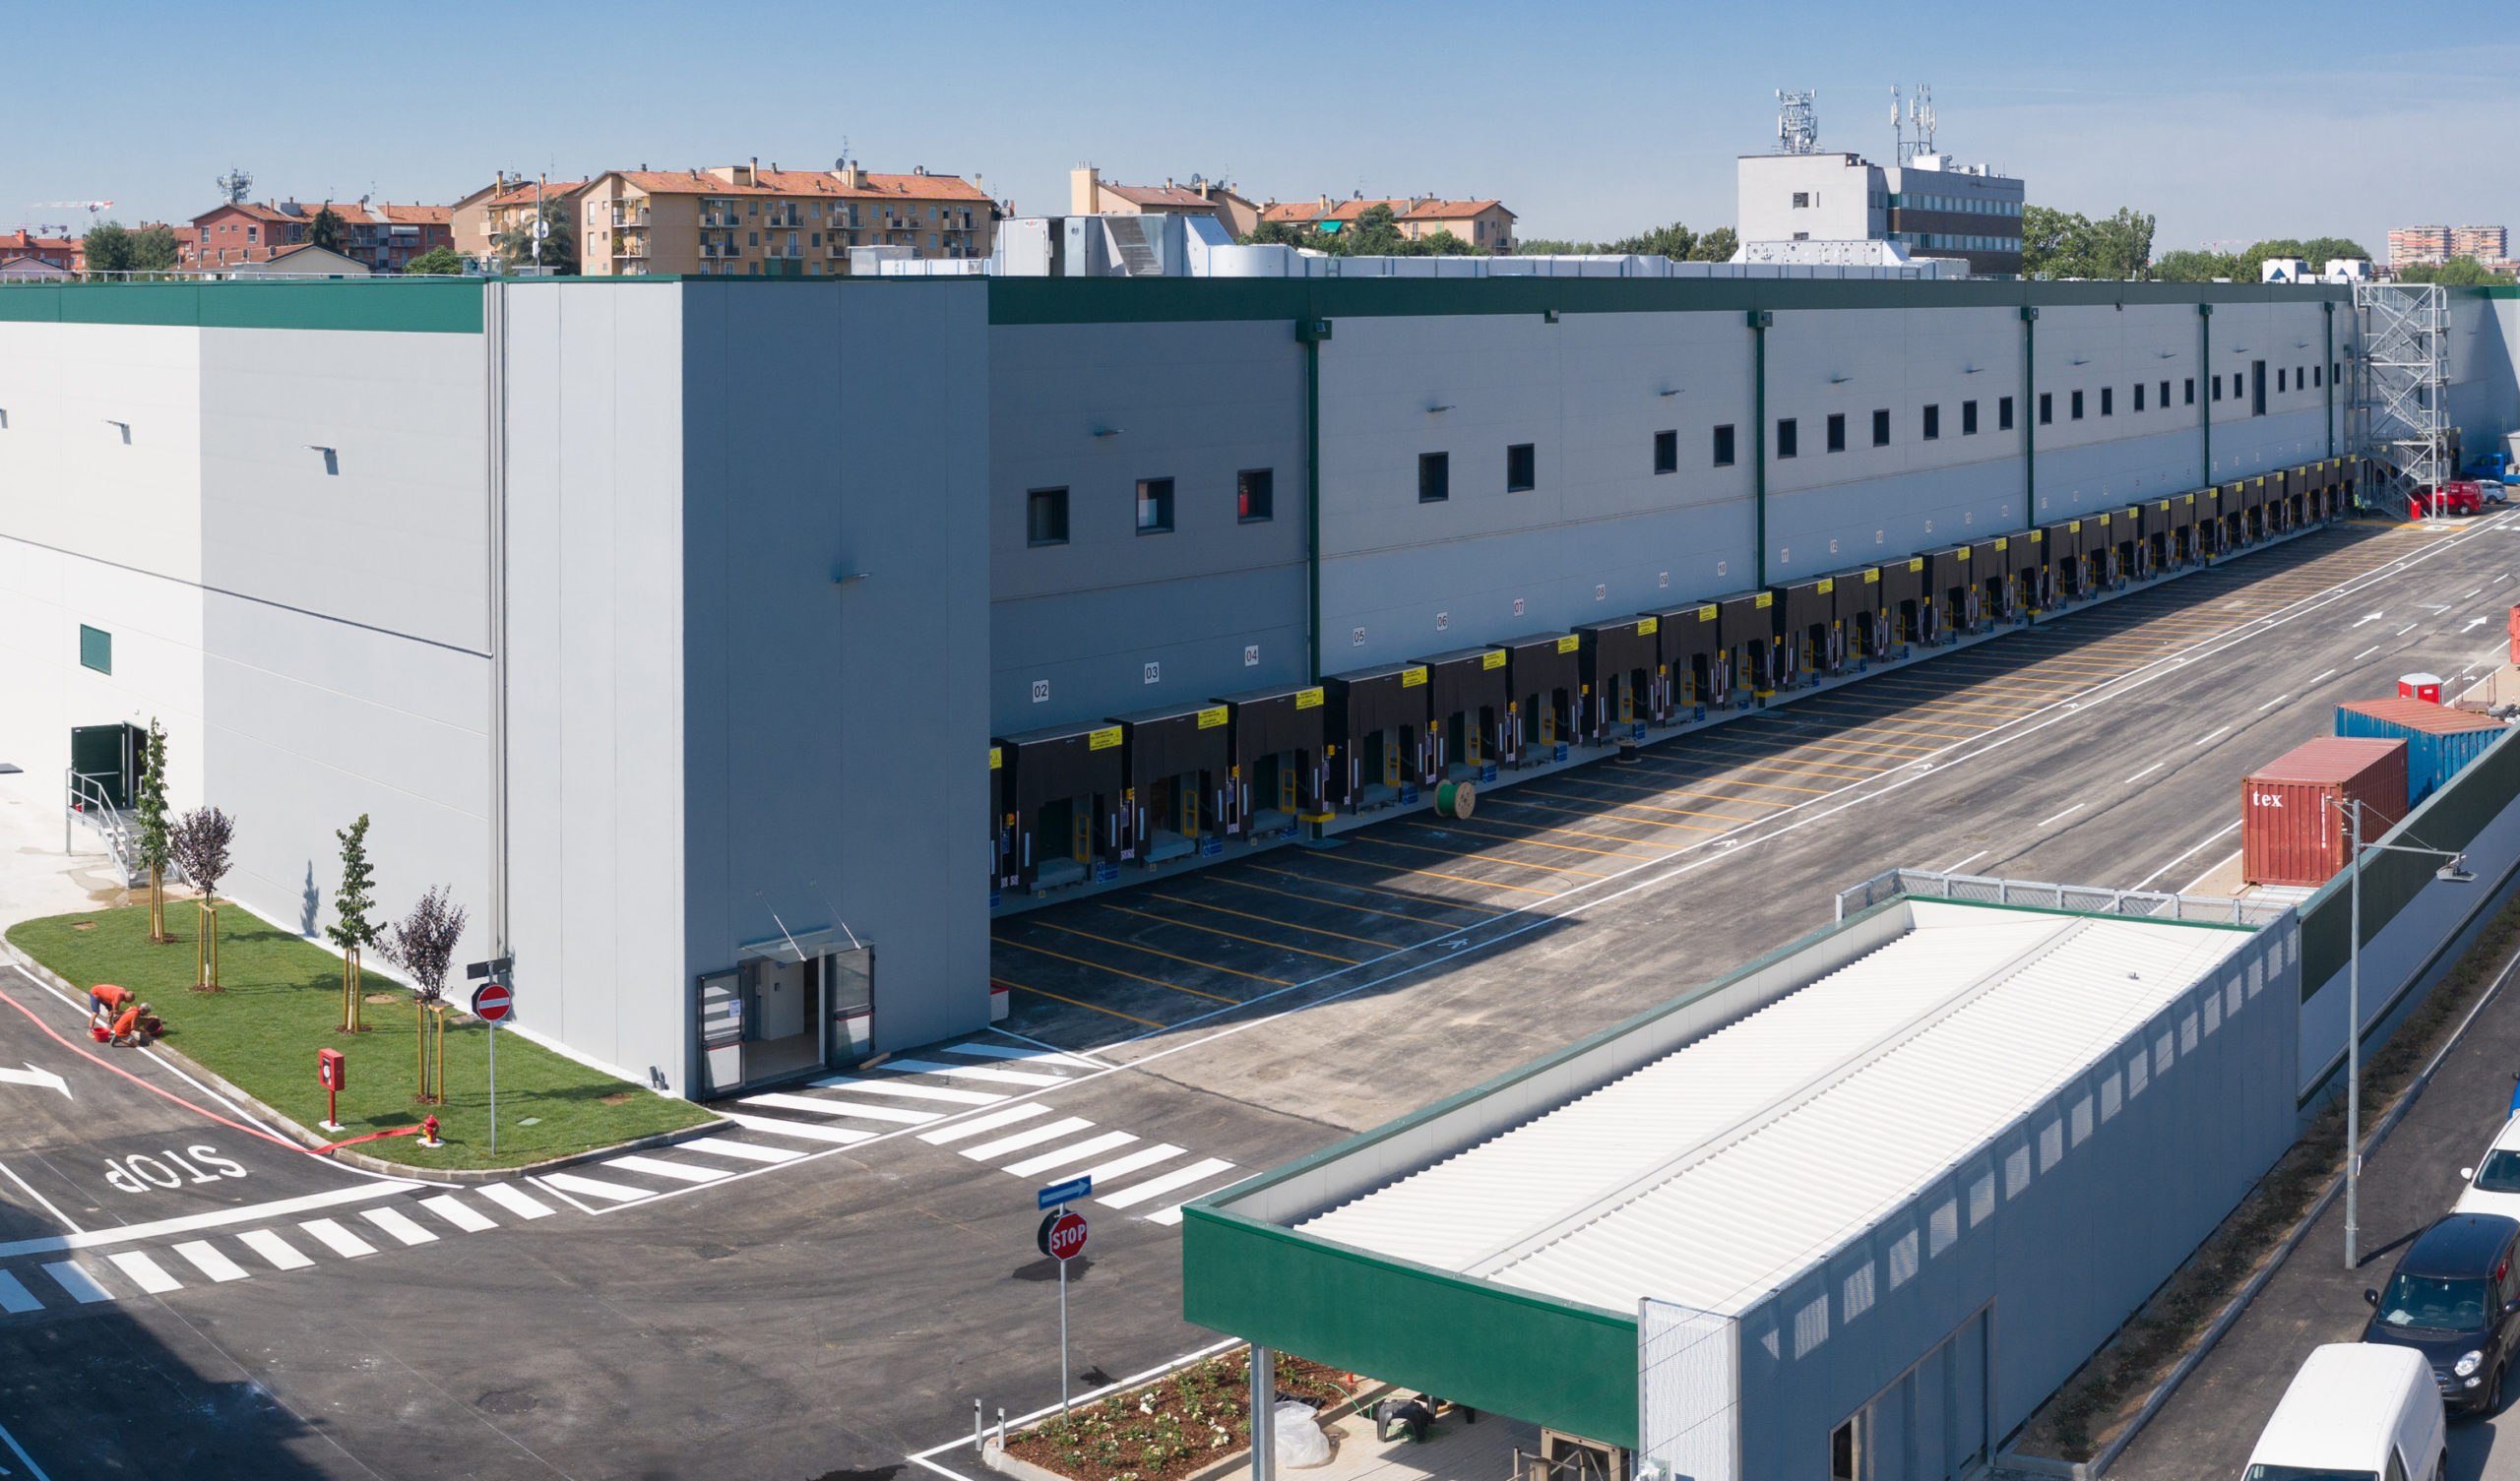 GSE ITALIA HANDS OVER A TEMPERATURE-CONTROLLED WAREHOUSE TO PROLOGIS IN MILAN